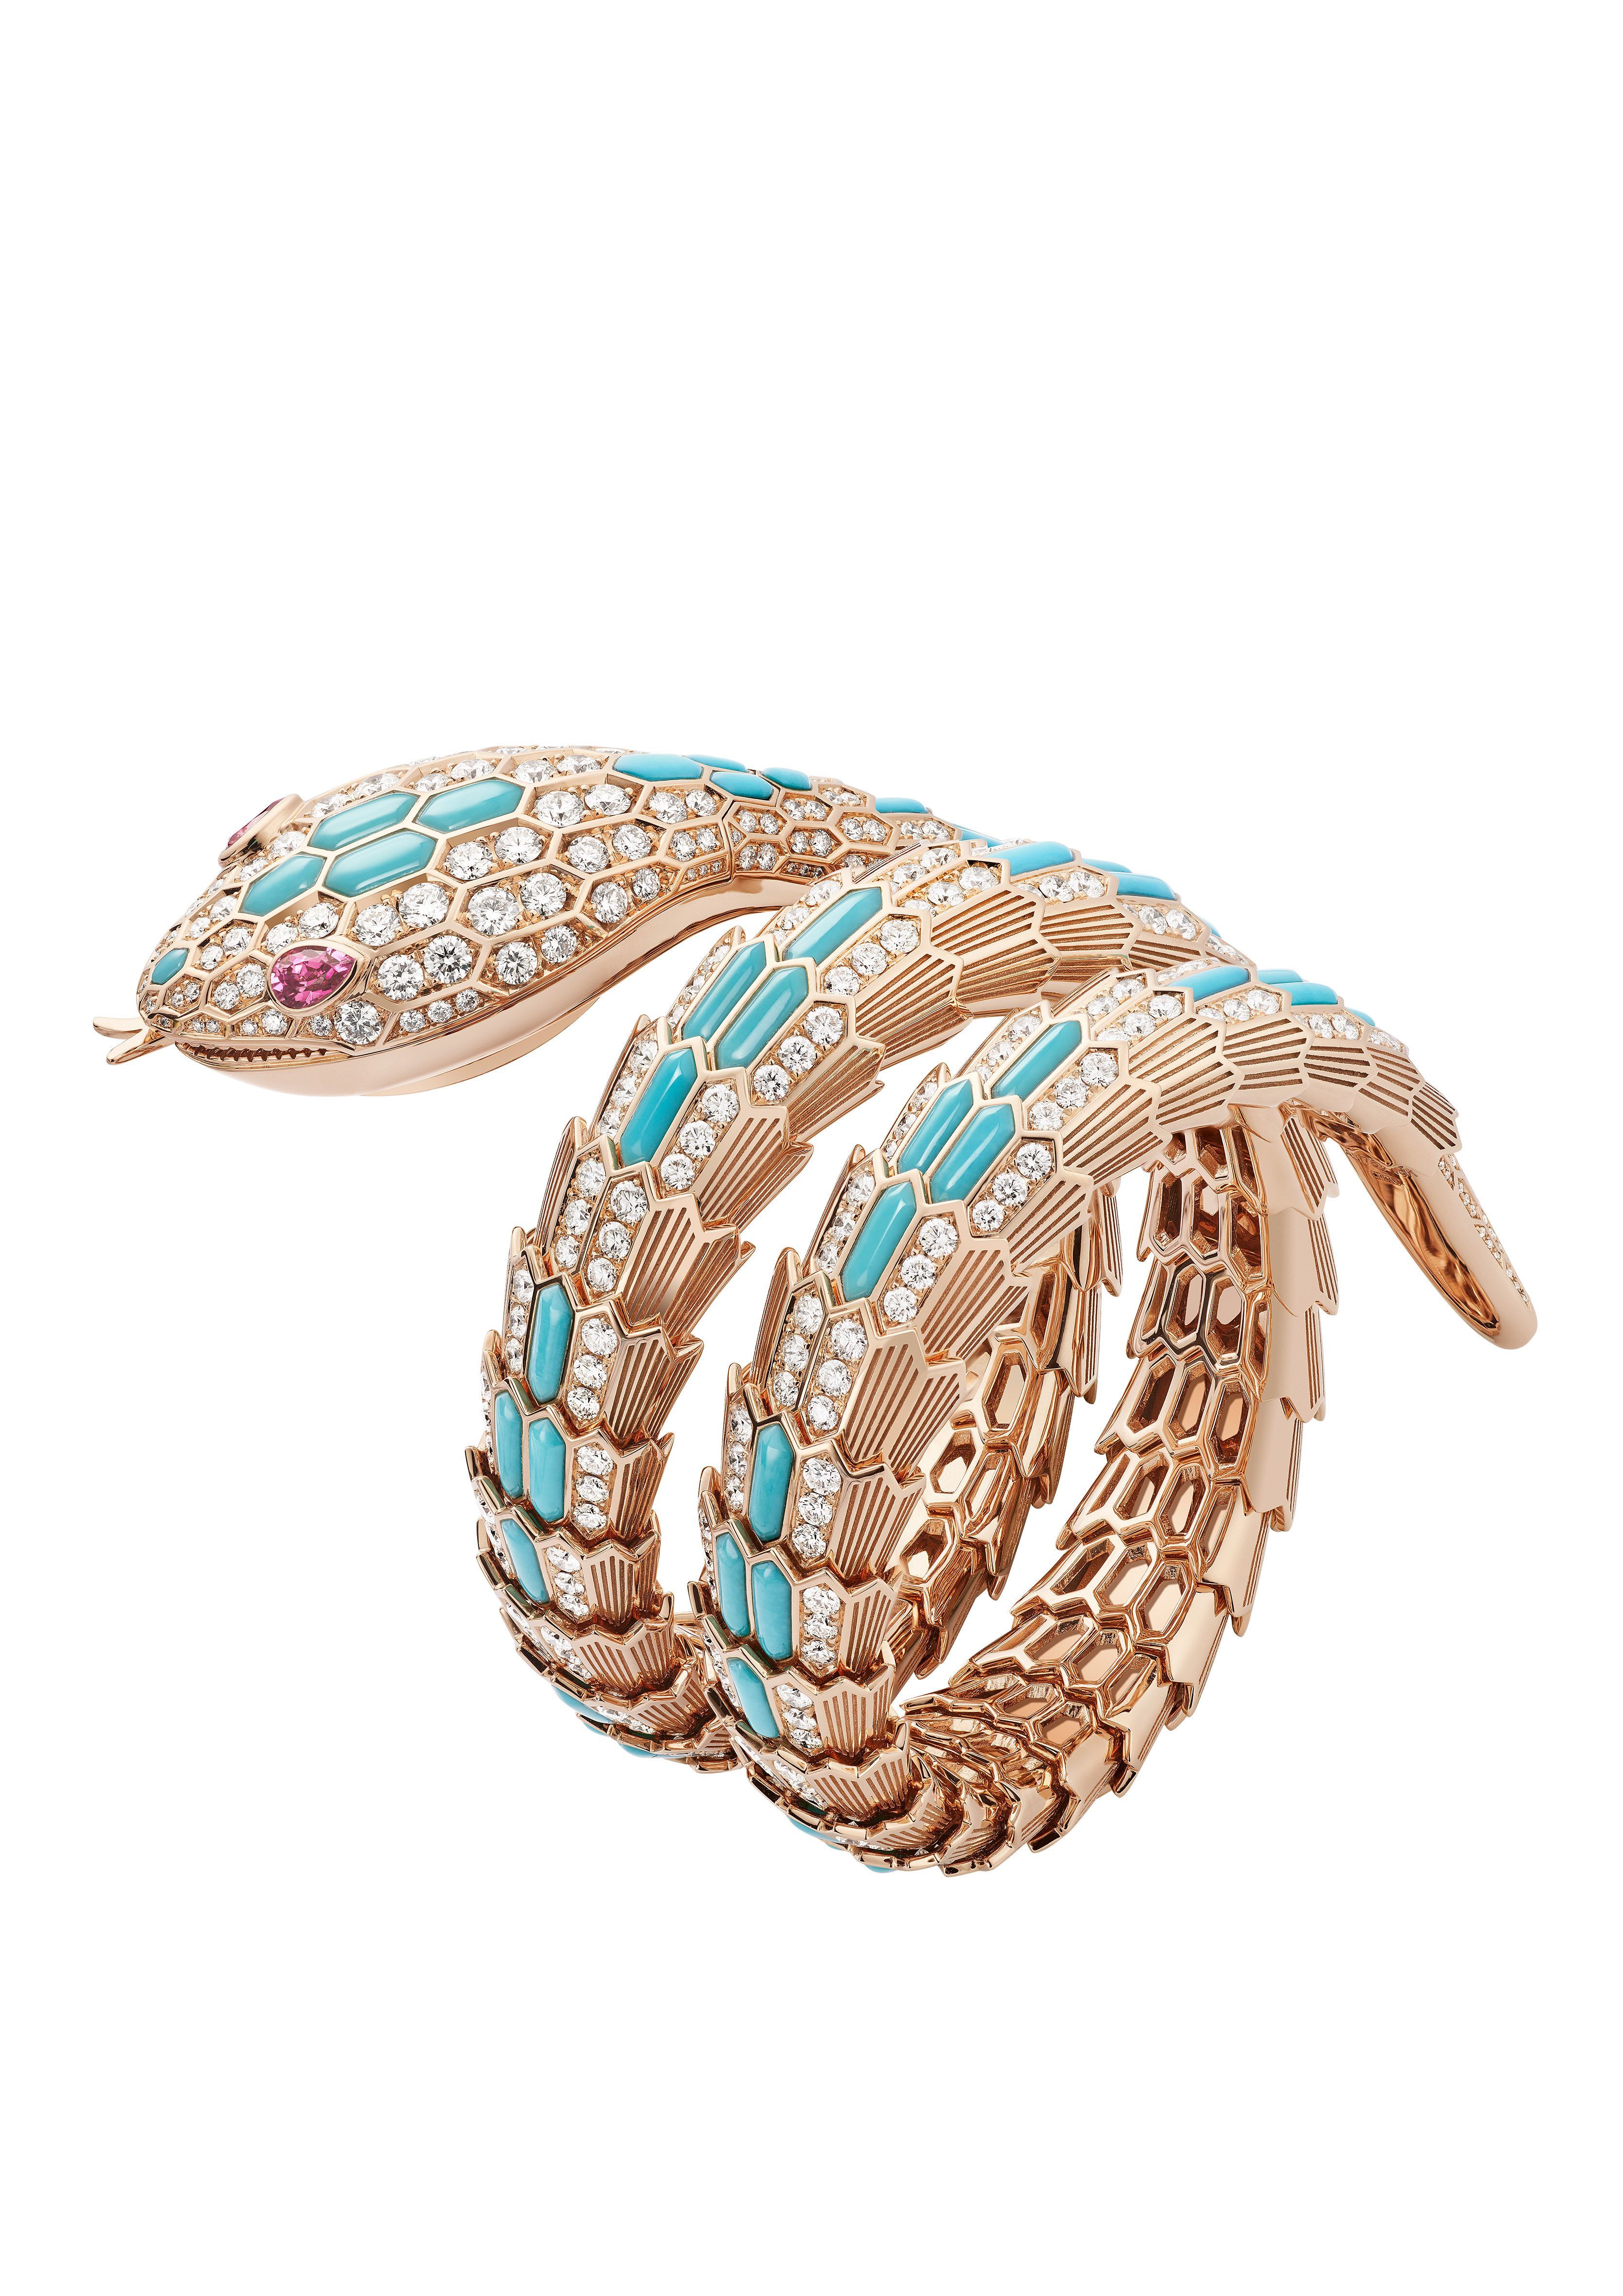 The Bulgari Serpenti – where to buy and what to know